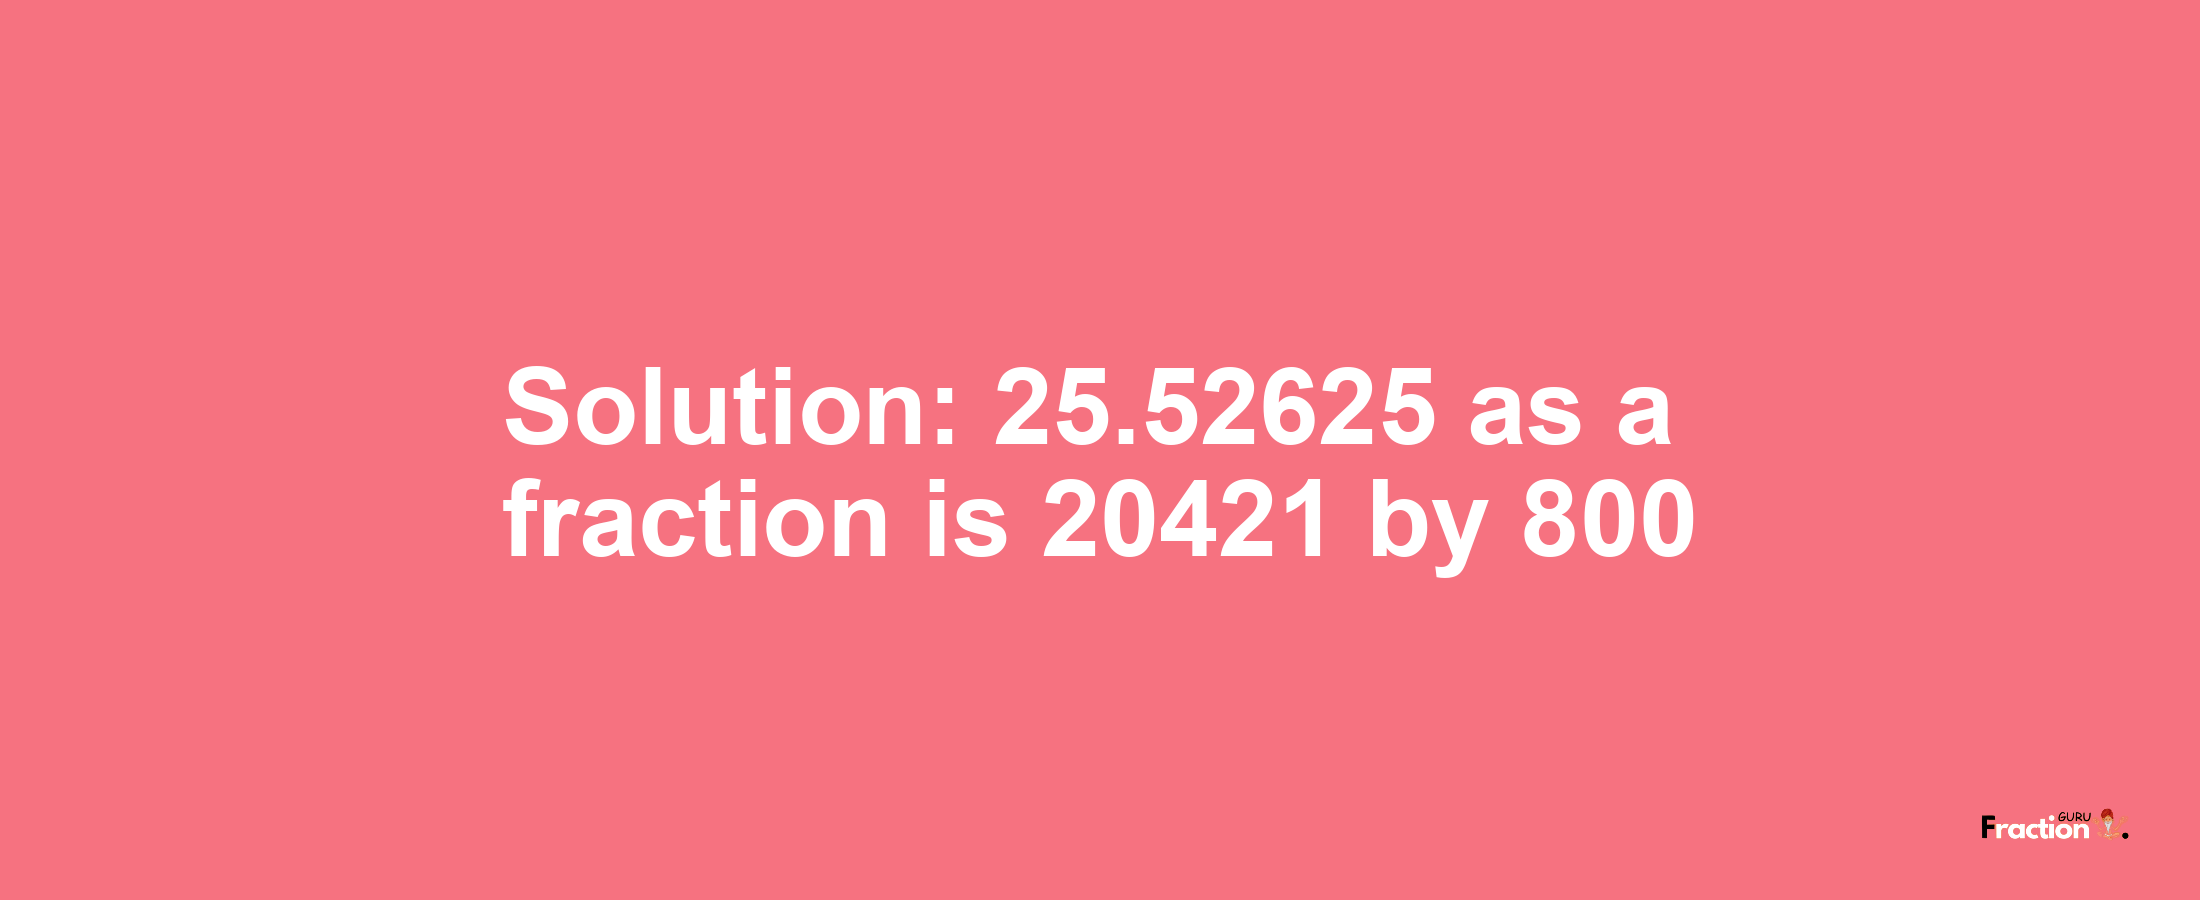 Solution:25.52625 as a fraction is 20421/800